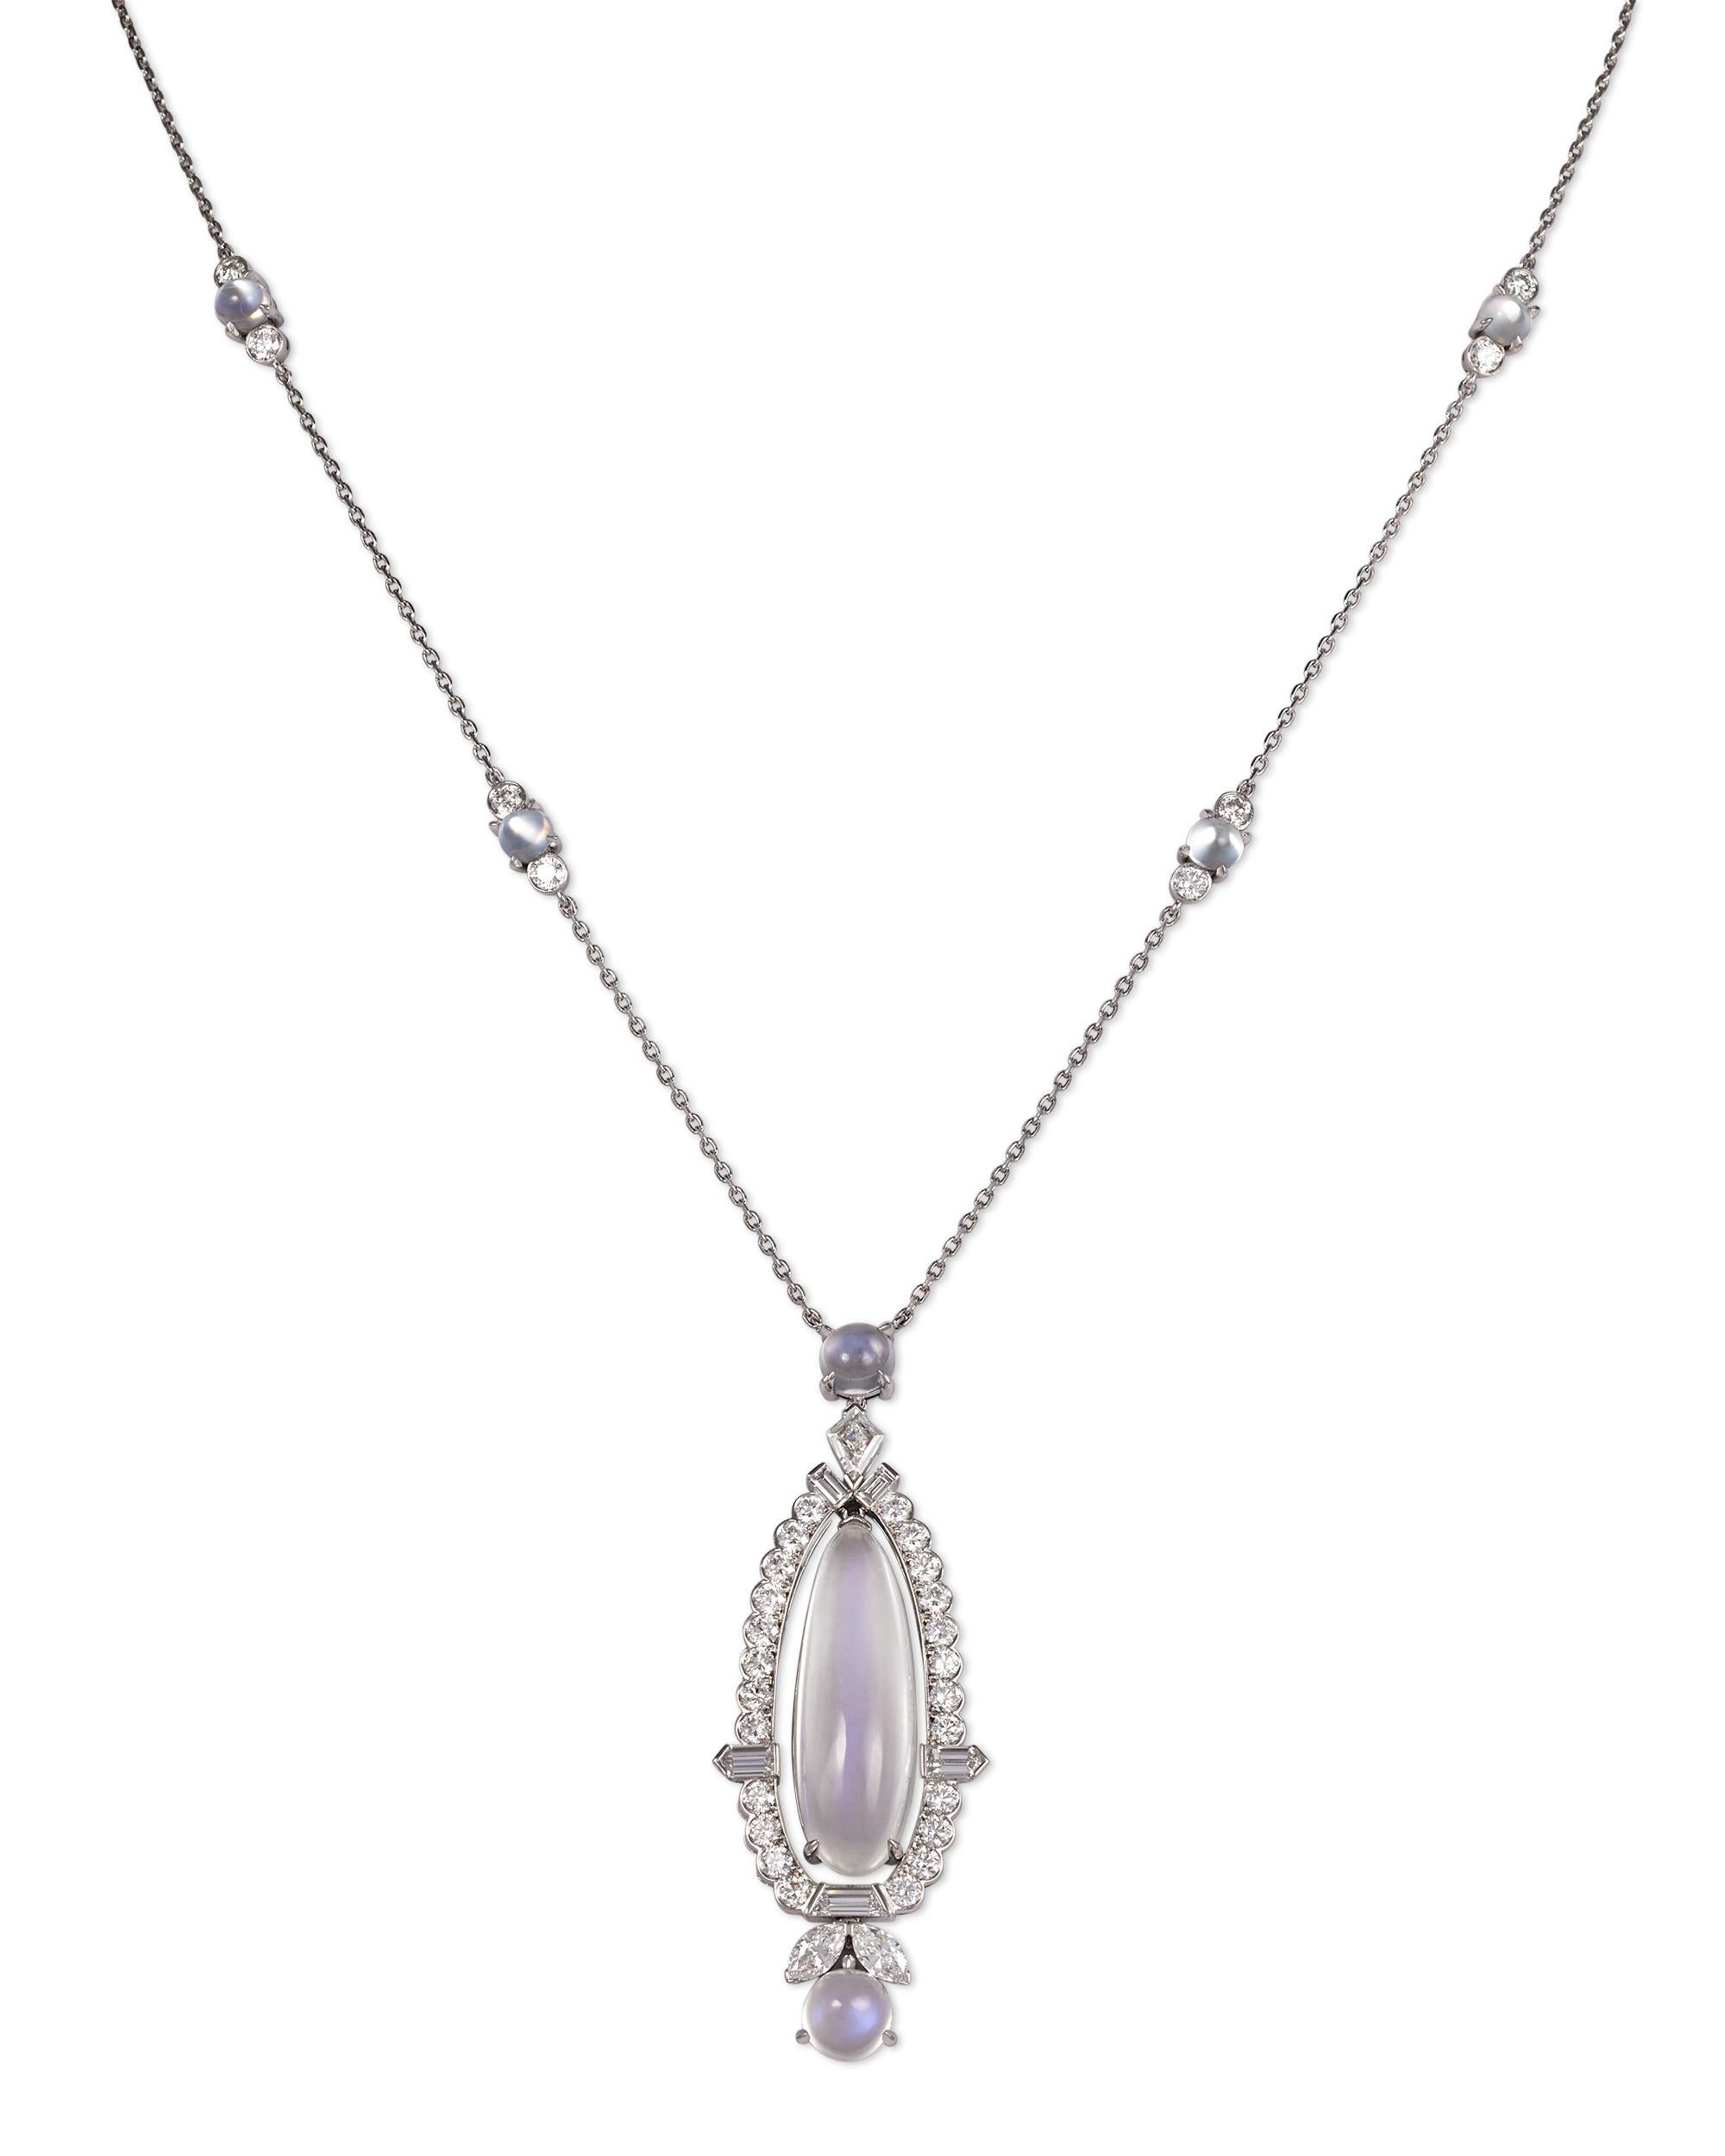 A luminous oval-shaped moonstone and several moonstone beads are the stars of this Raymond Yard pendant necklace. Moonstone is a type of gemstone-quality variety of feldspar that is known for its pearl-like schiller, or iridescent luster. These